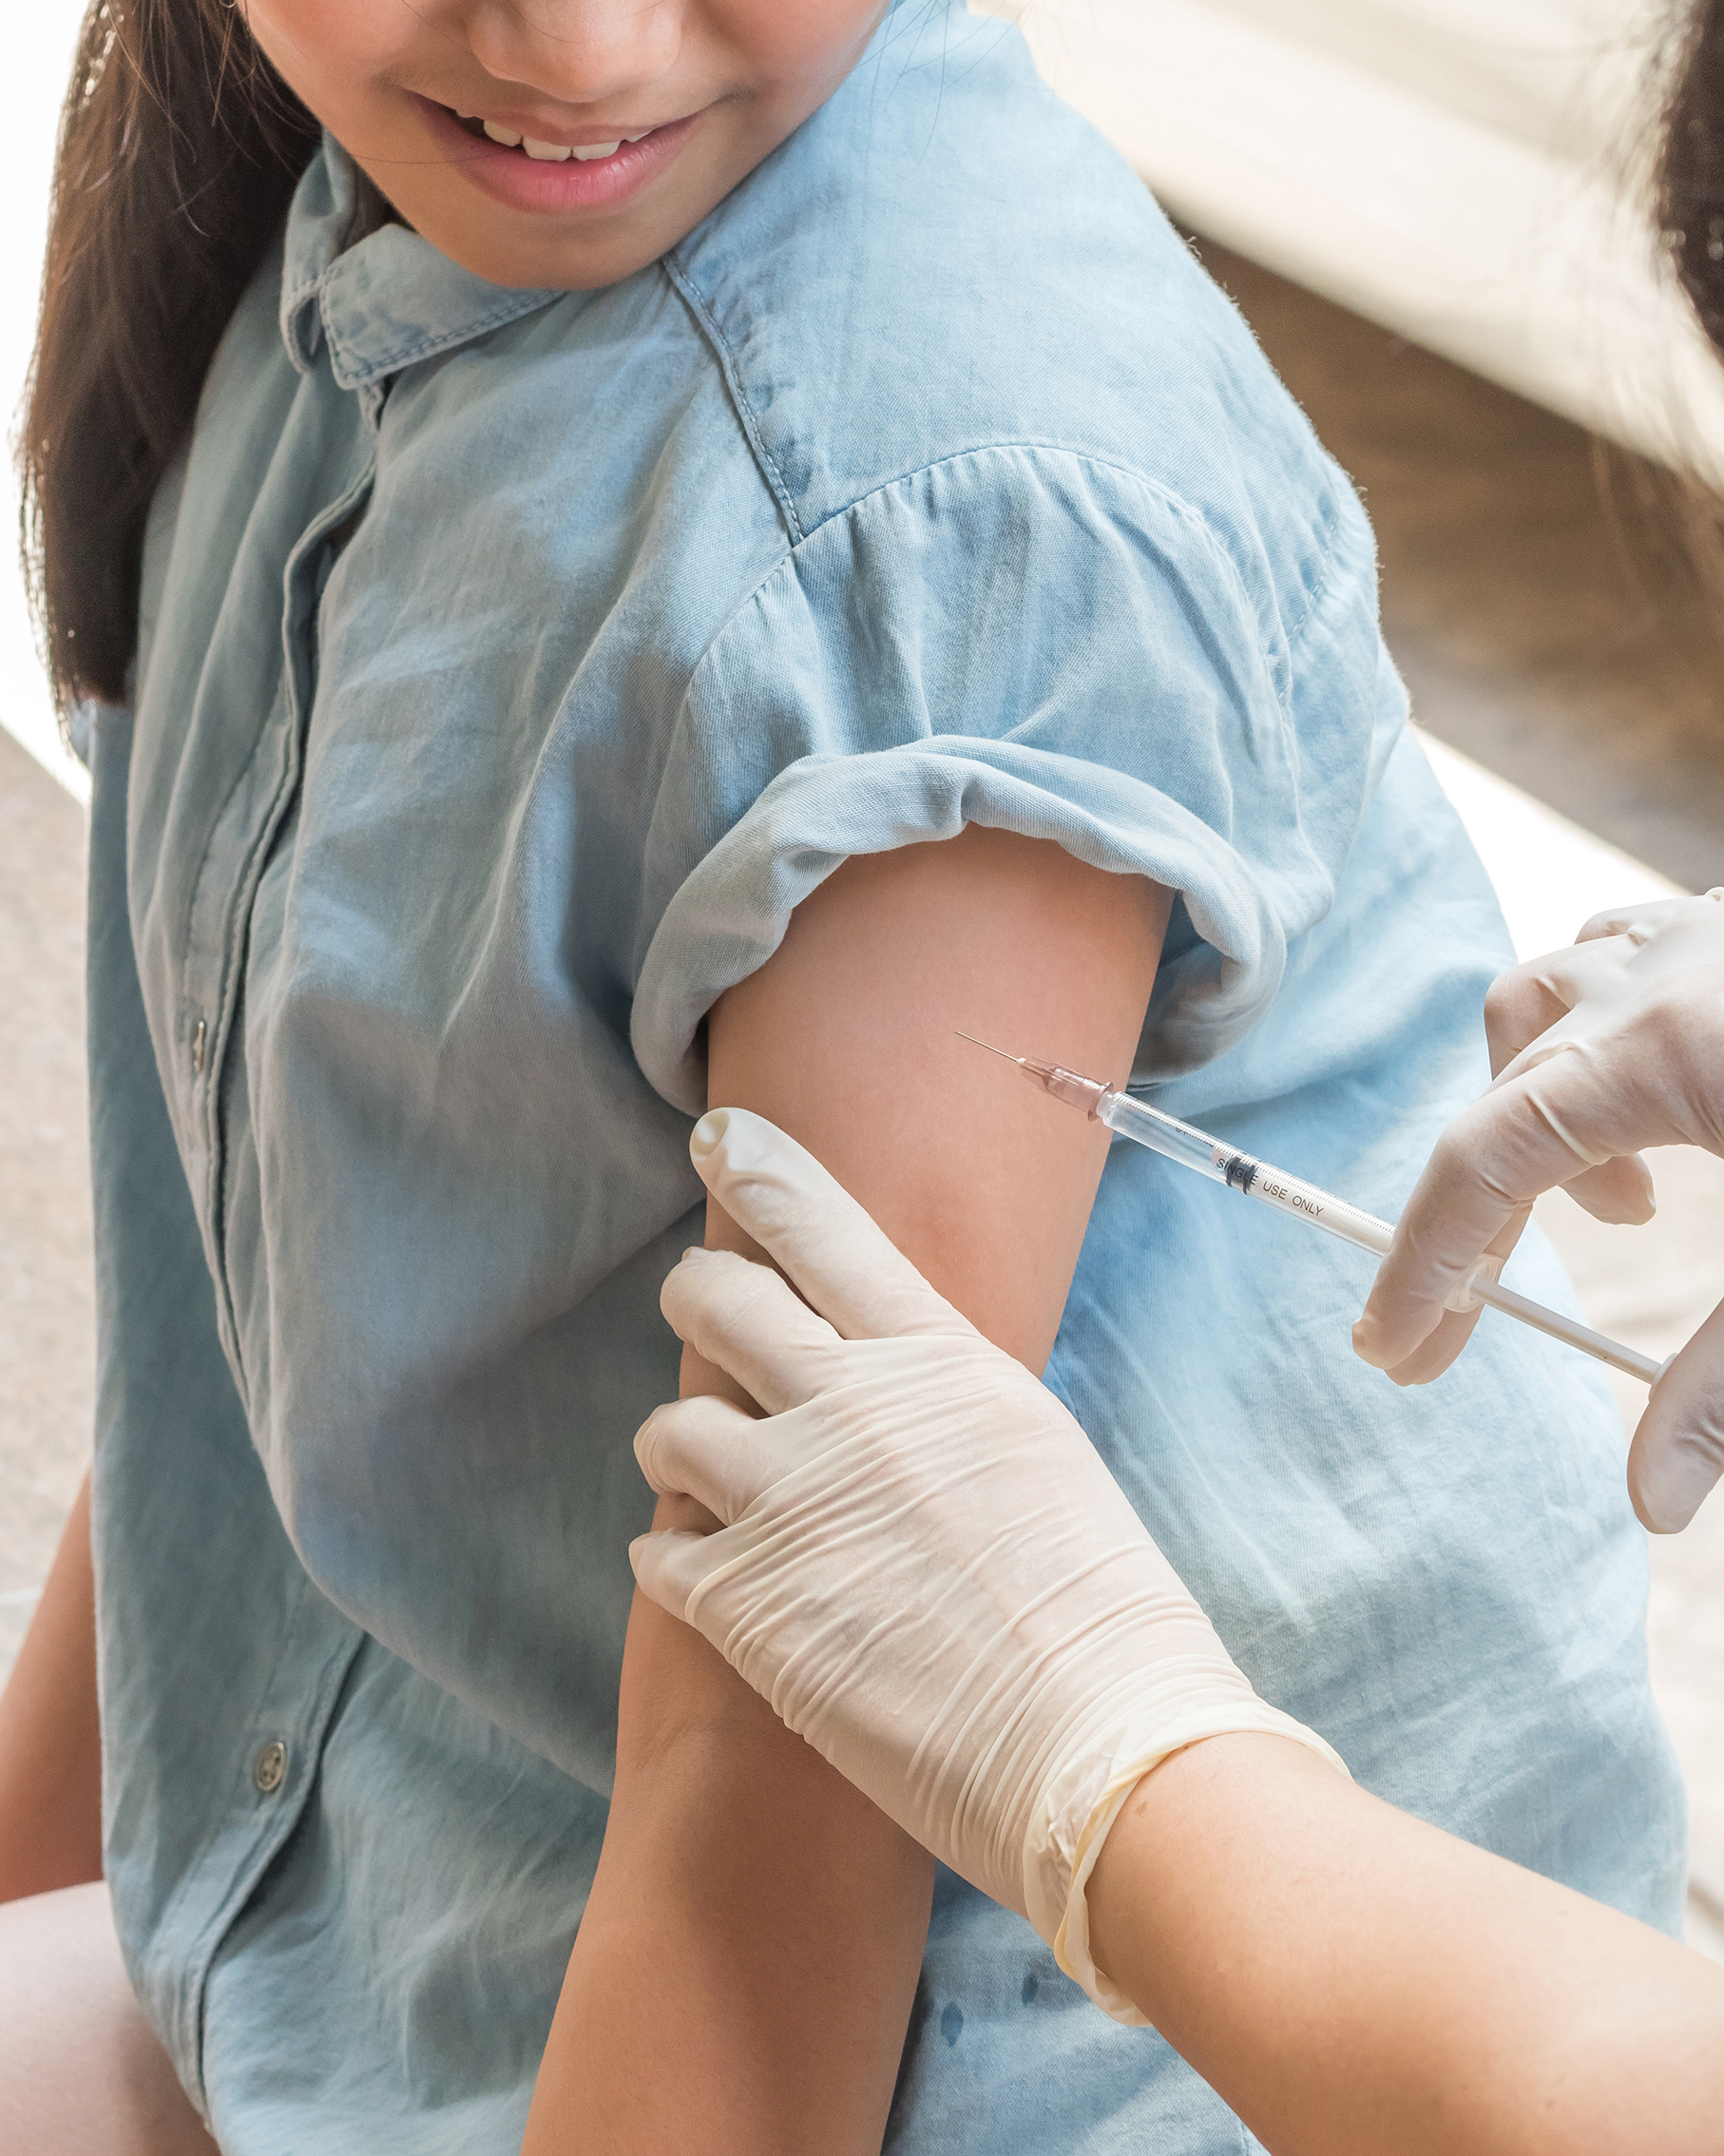 10 Common Misconceptions About Vaccines Every Parent Should Know